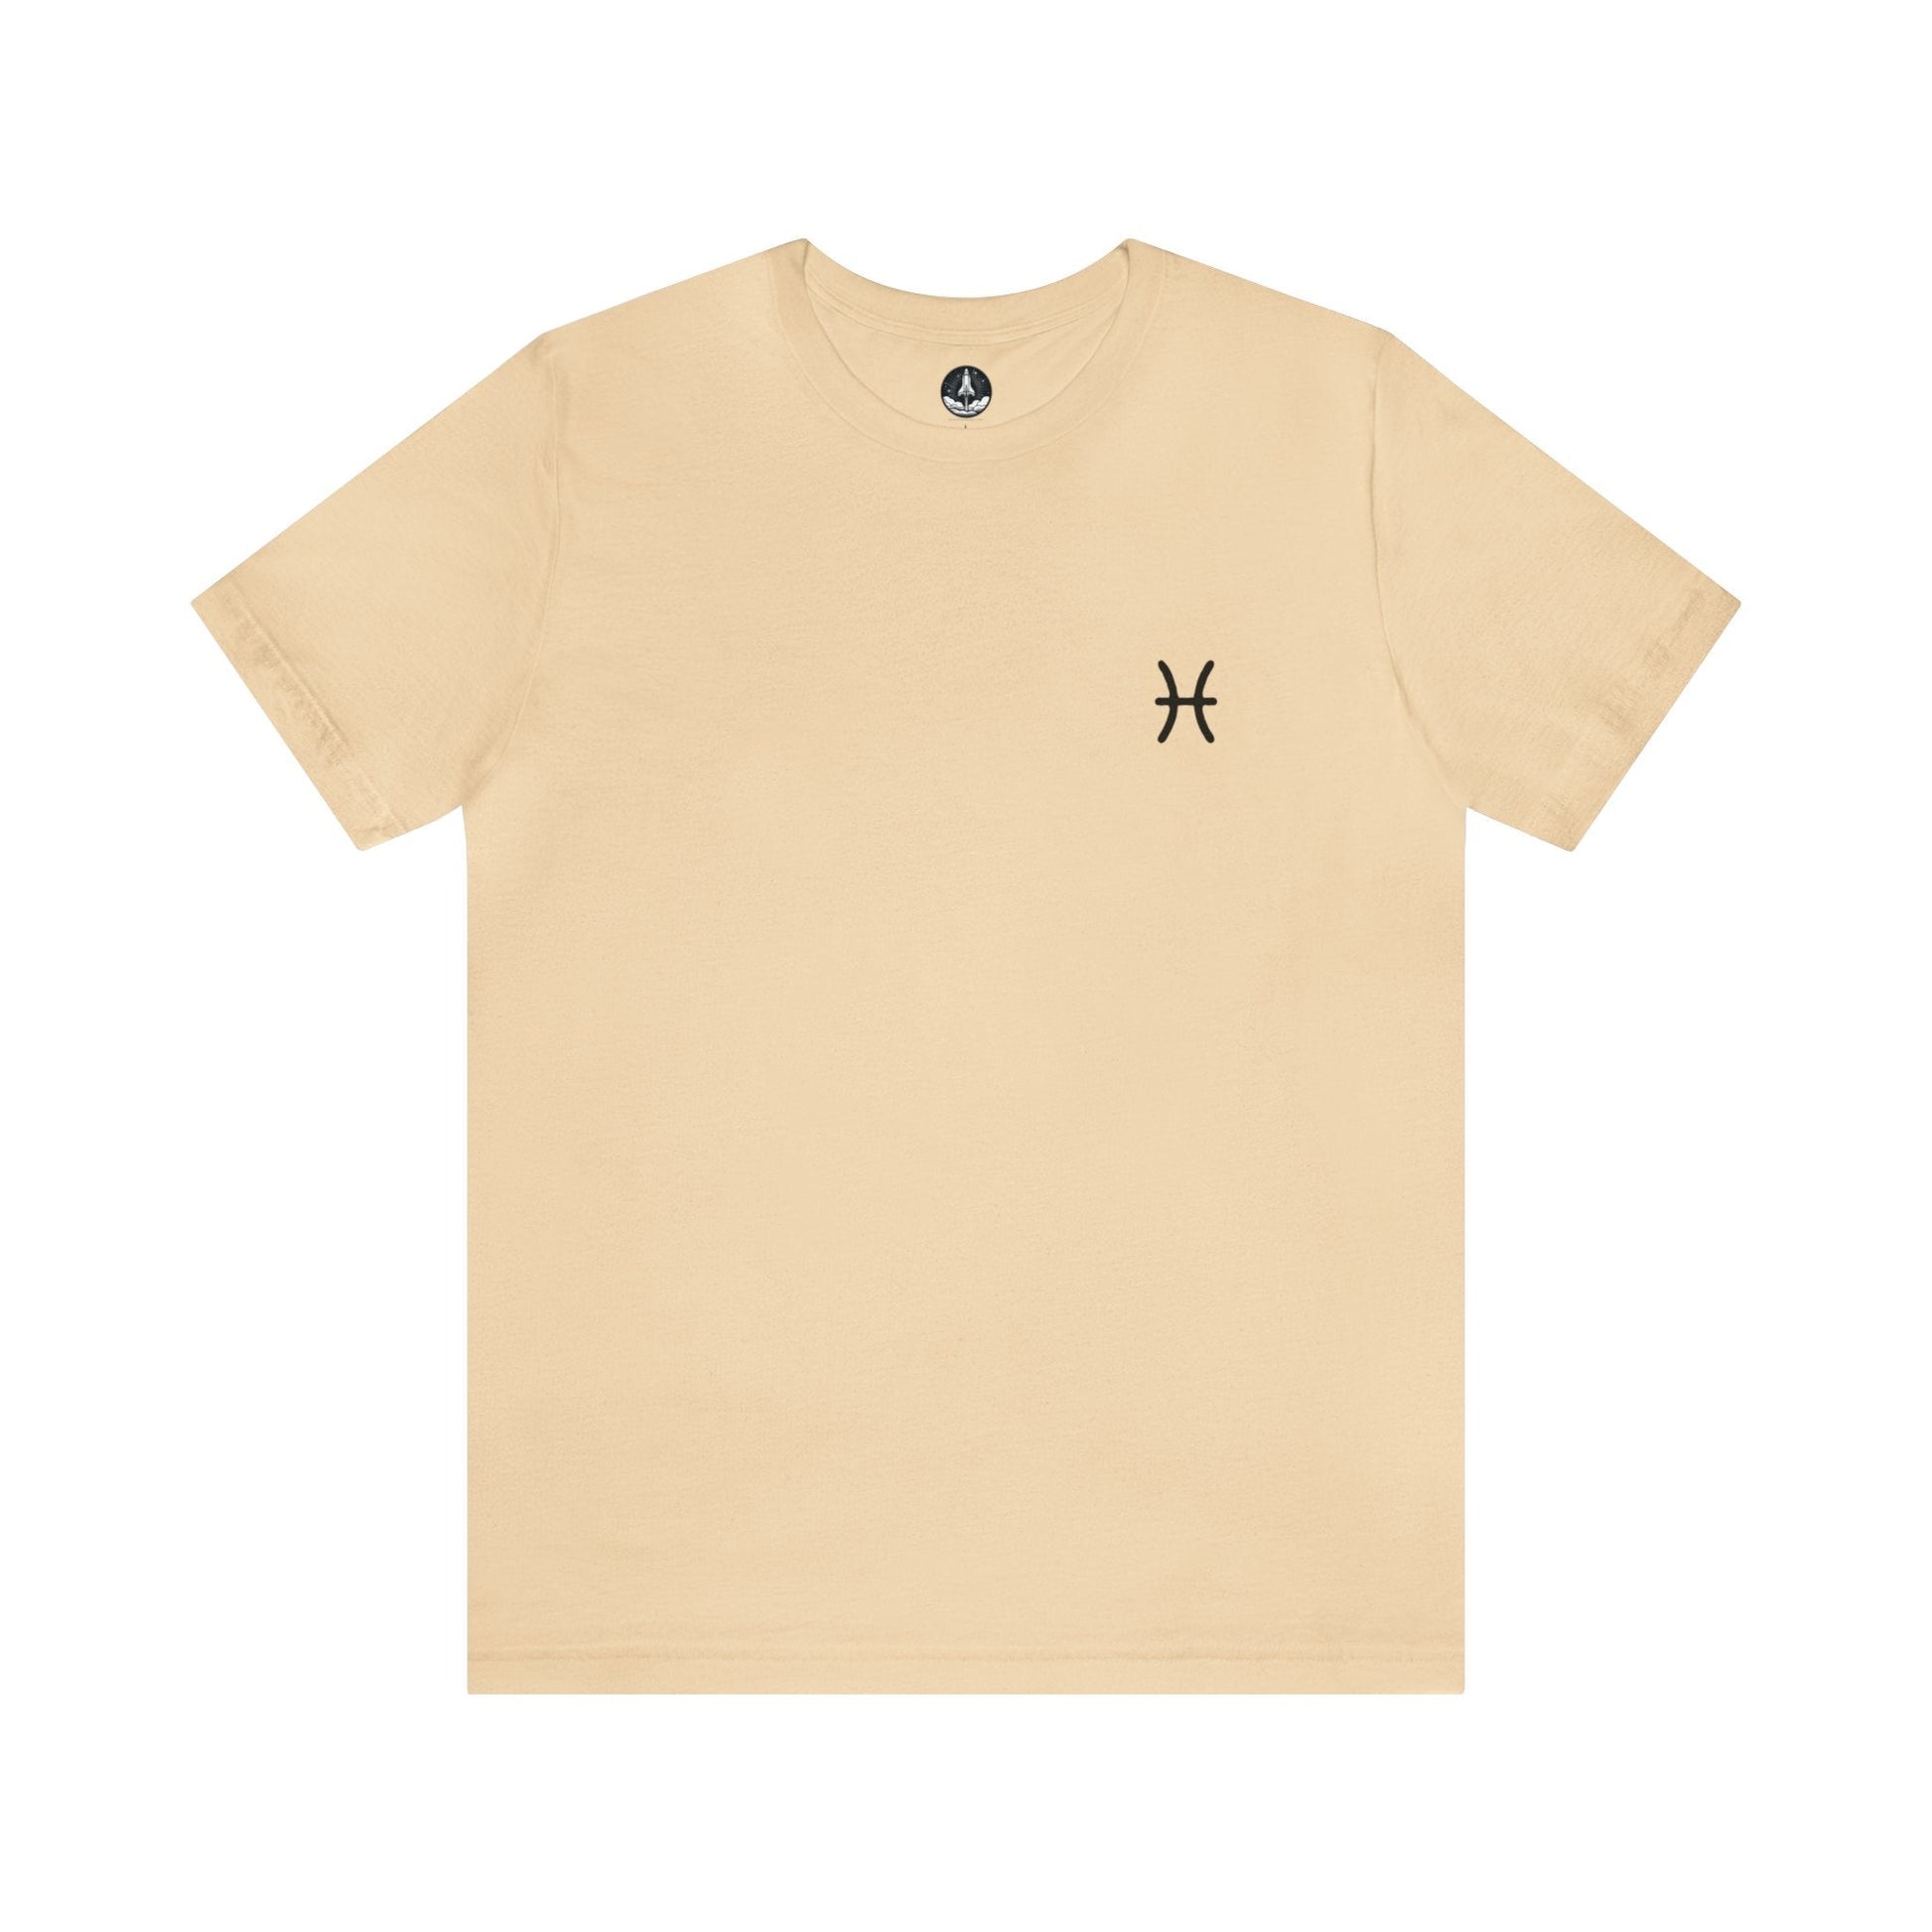 T-Shirt Soft Cream / S Pisces Fish Silhouette T-Shirt: Dreamy Comfort for the Compassionate Soul